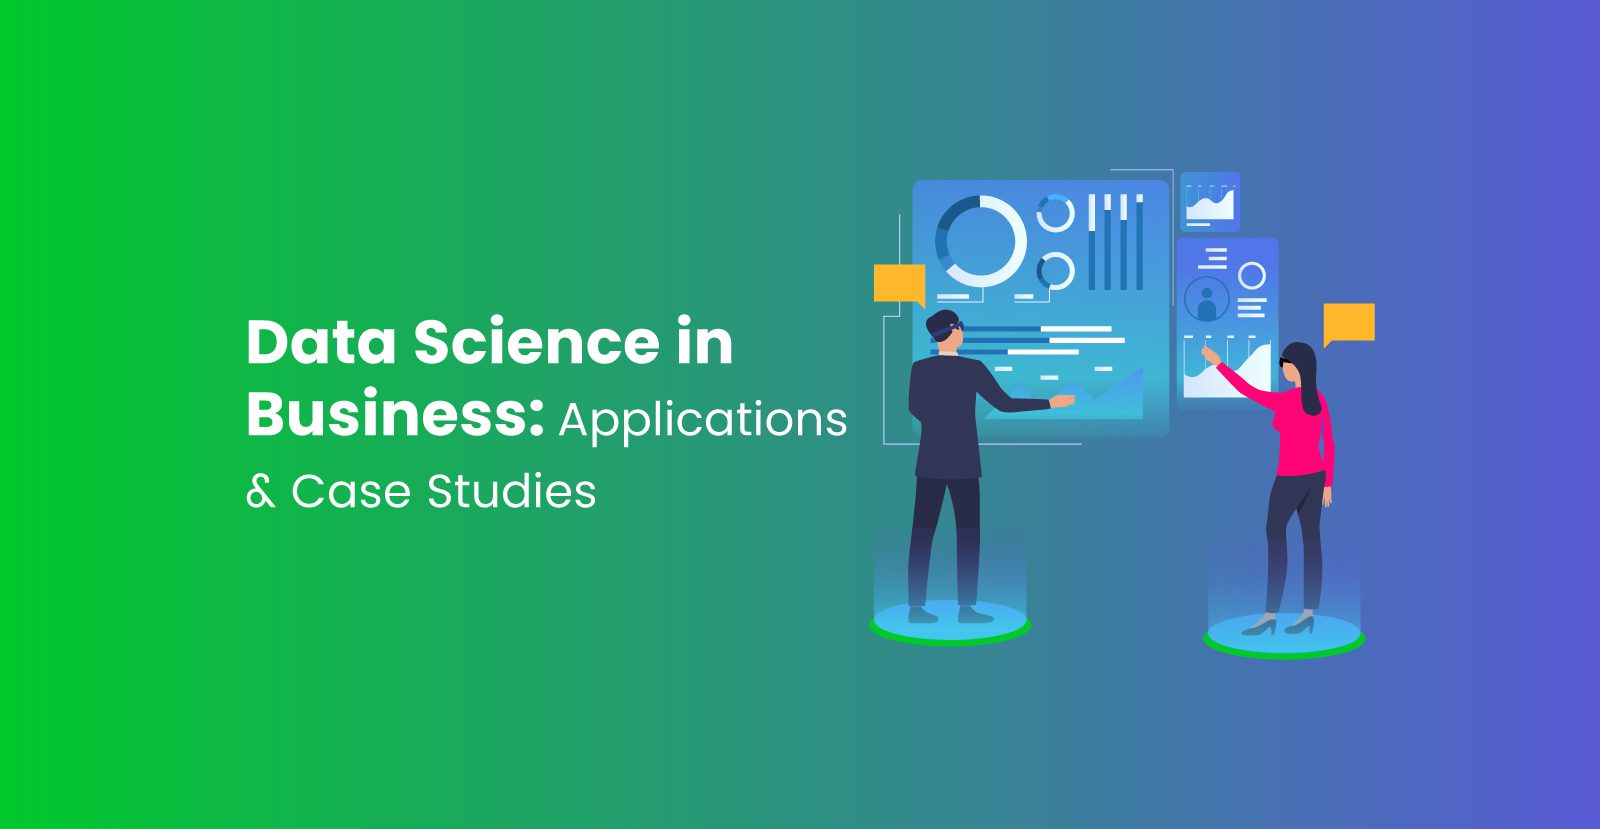 Data science in business: applications and case studies